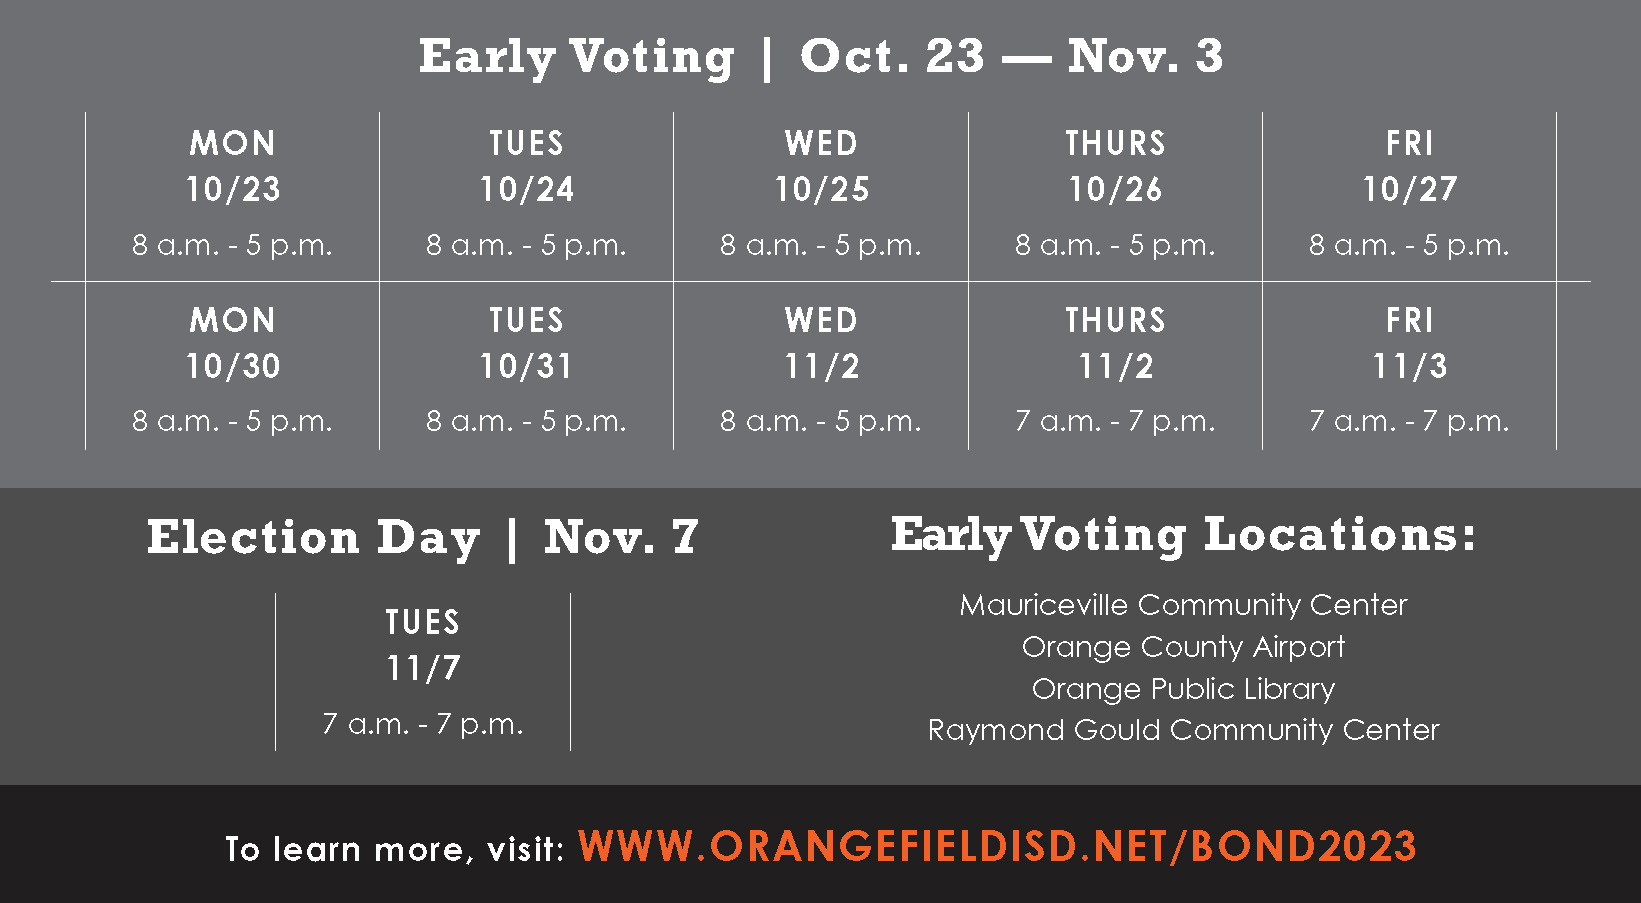 Early Voting Locations - Orange County Airport, Orange Library, Mauriceville Community Center, Raymond Gould Community Center